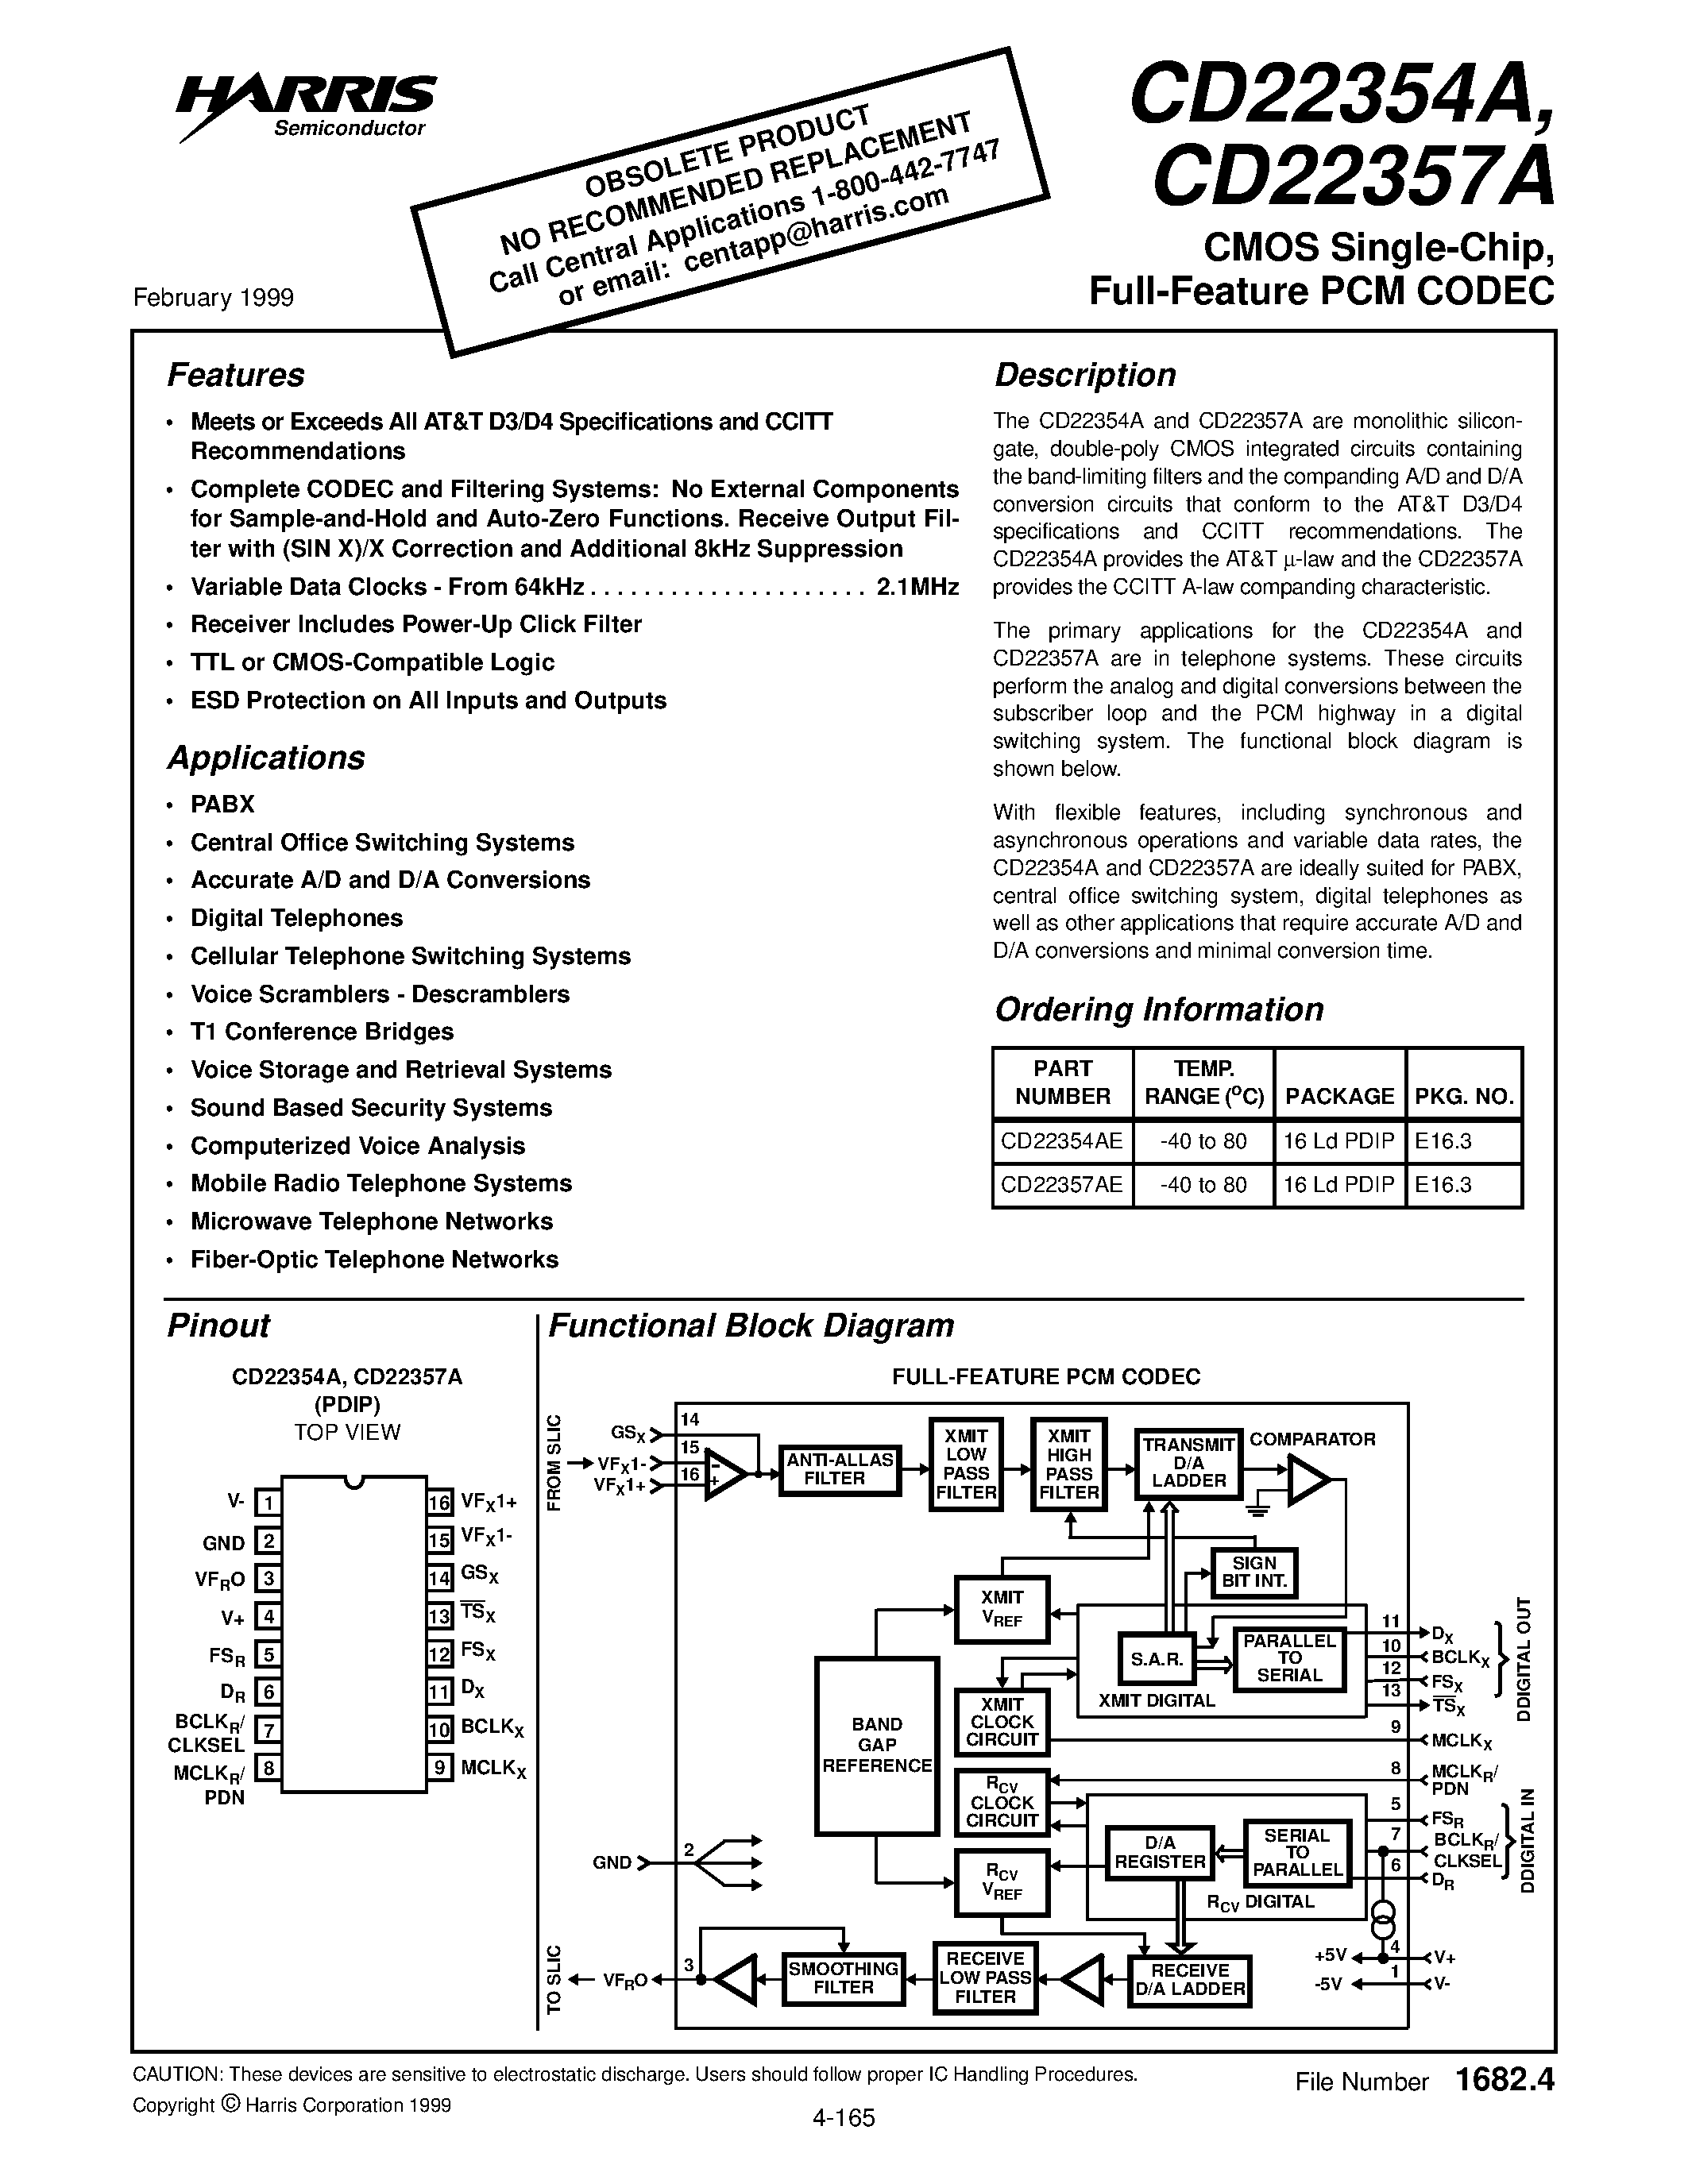 Даташит CD22354AE - CMOS Single-Chip/ Full-Feature PCM CODEC страница 1